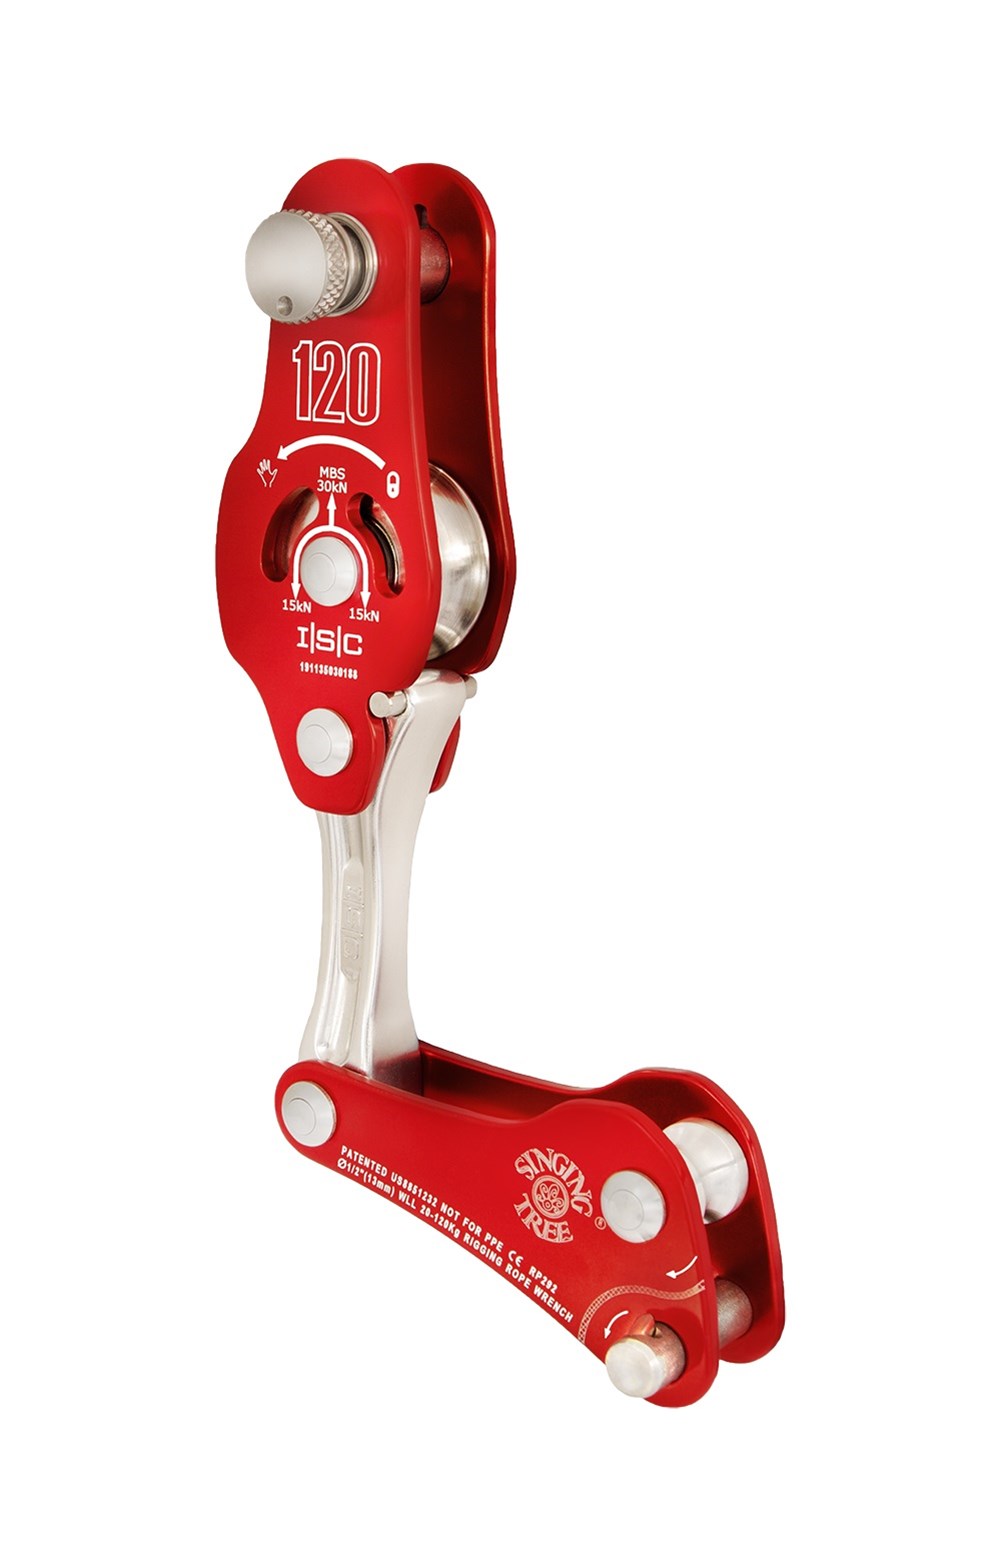 ISC Rigging Rope Wrench - Lowest prices & free shipping